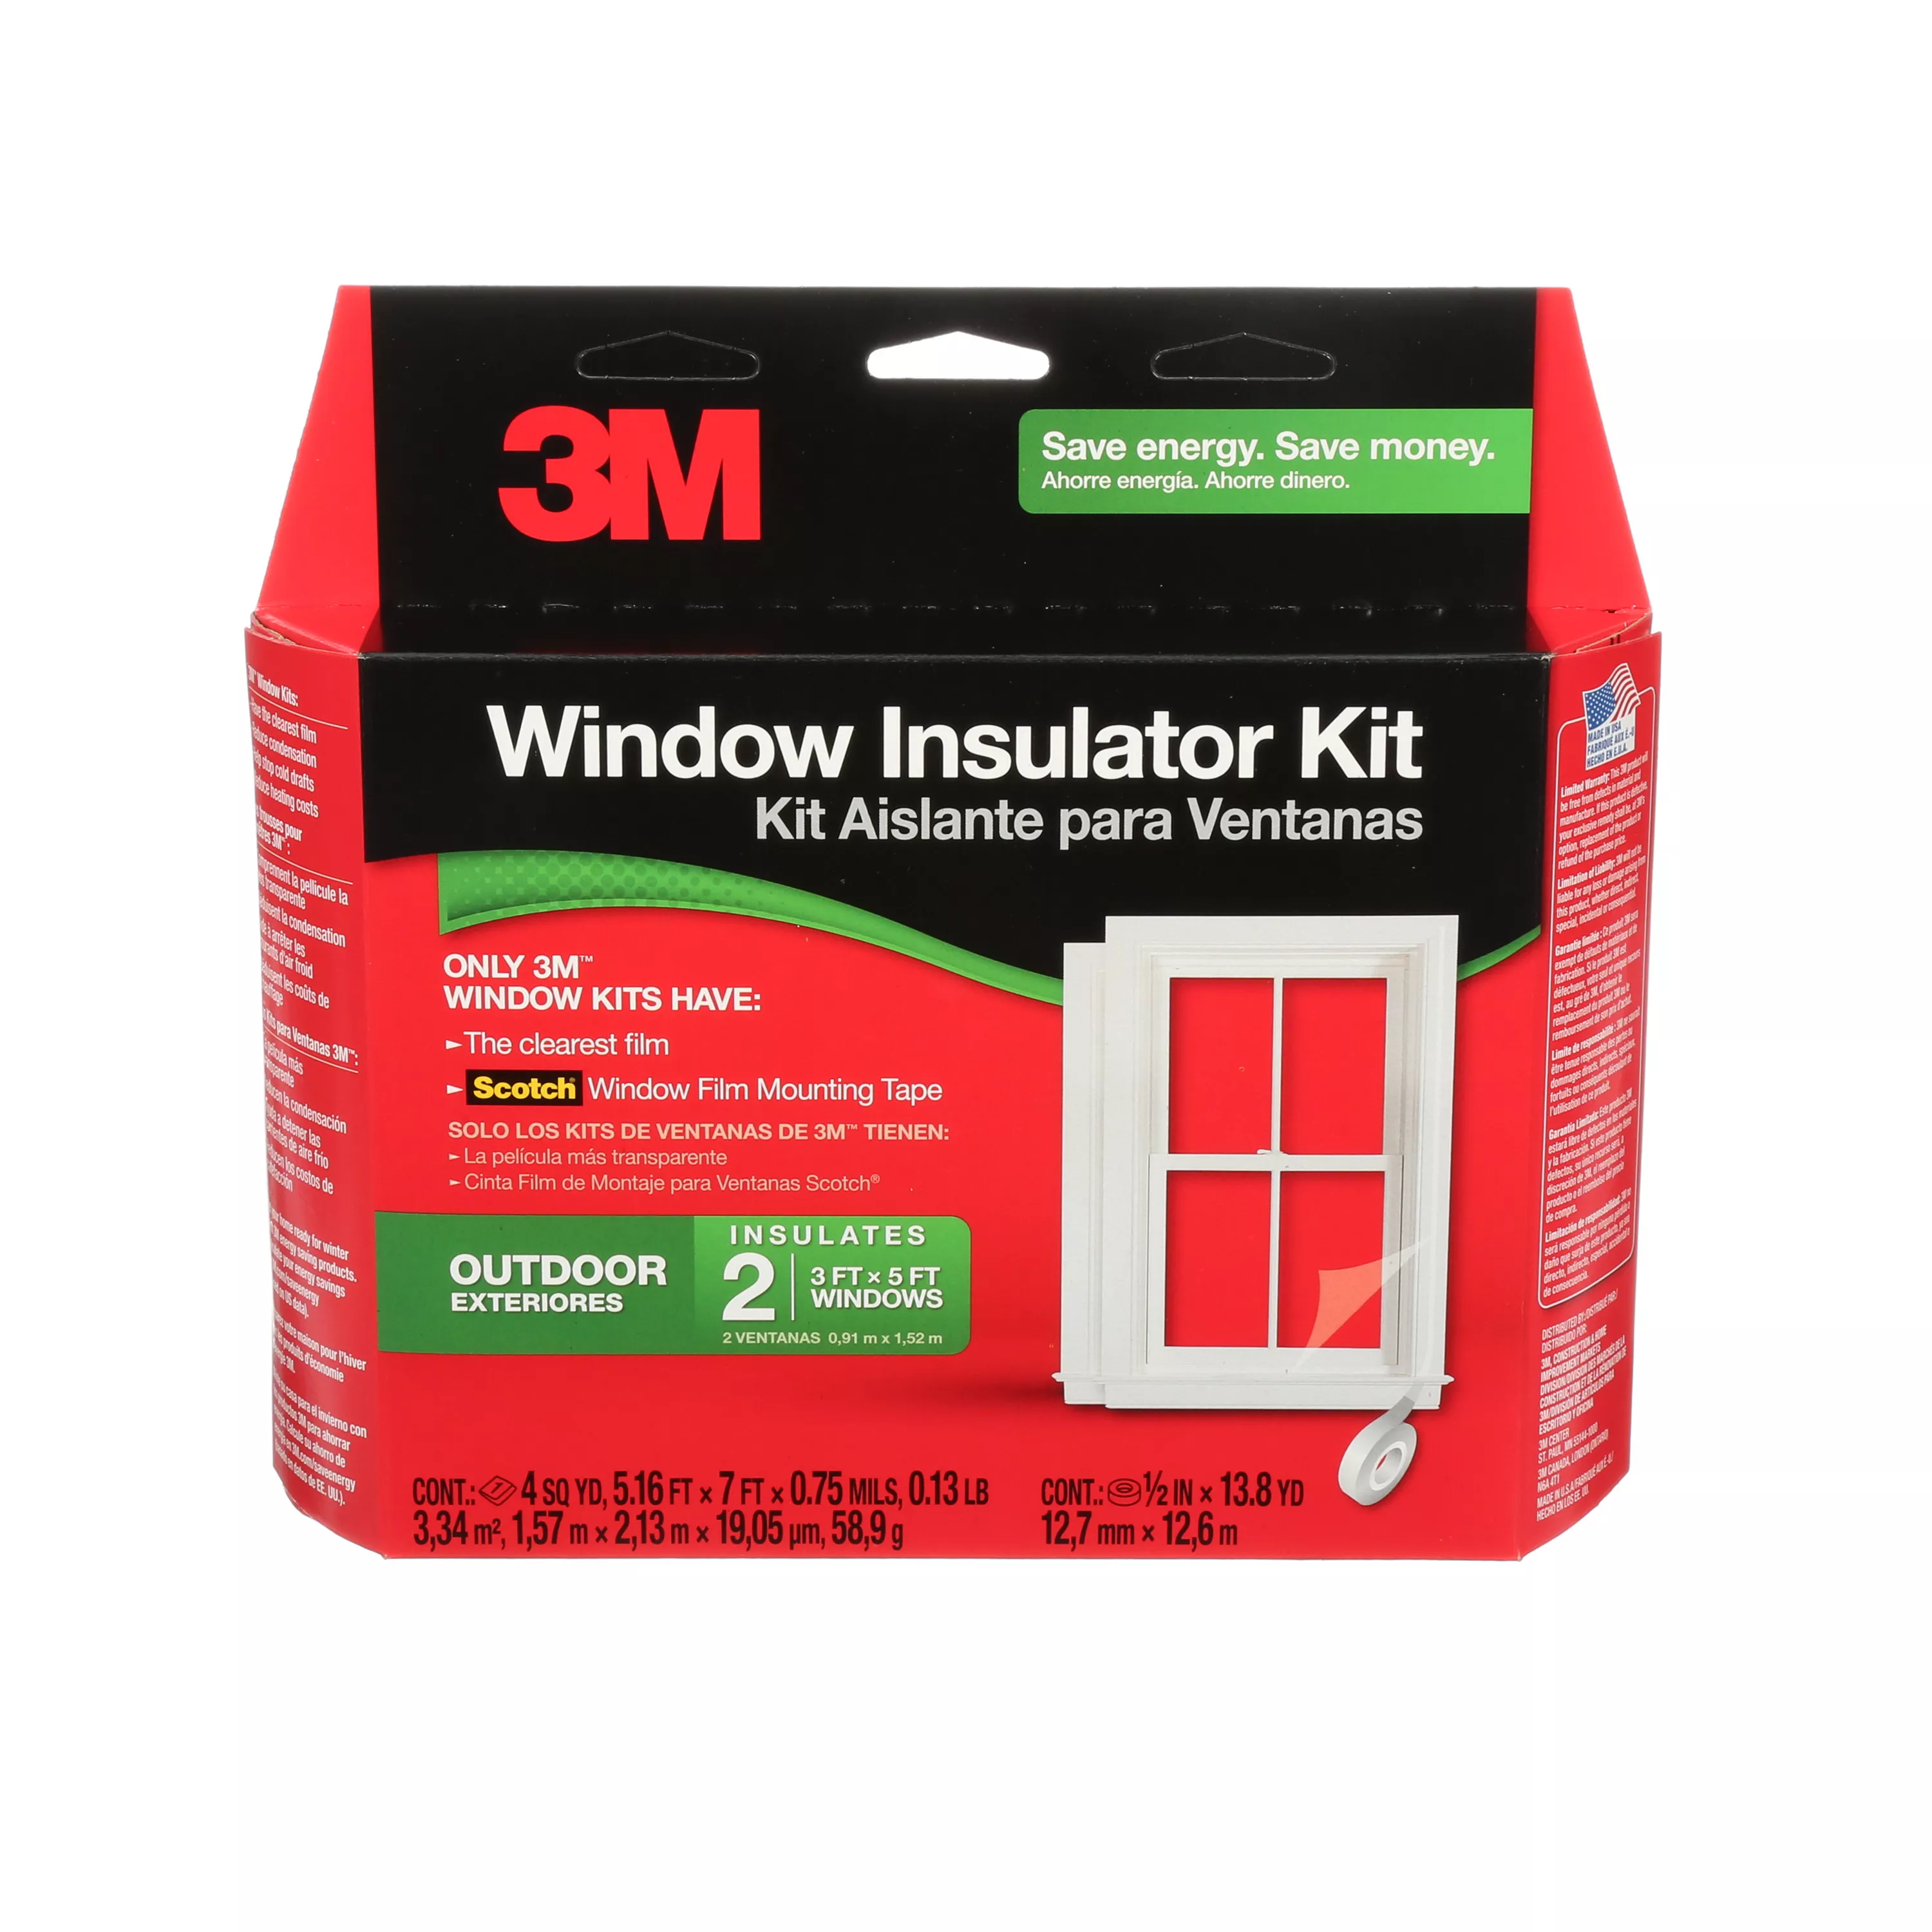 3M™ Outdoor Window Insulator Kit,2170 W-6, Two Pack